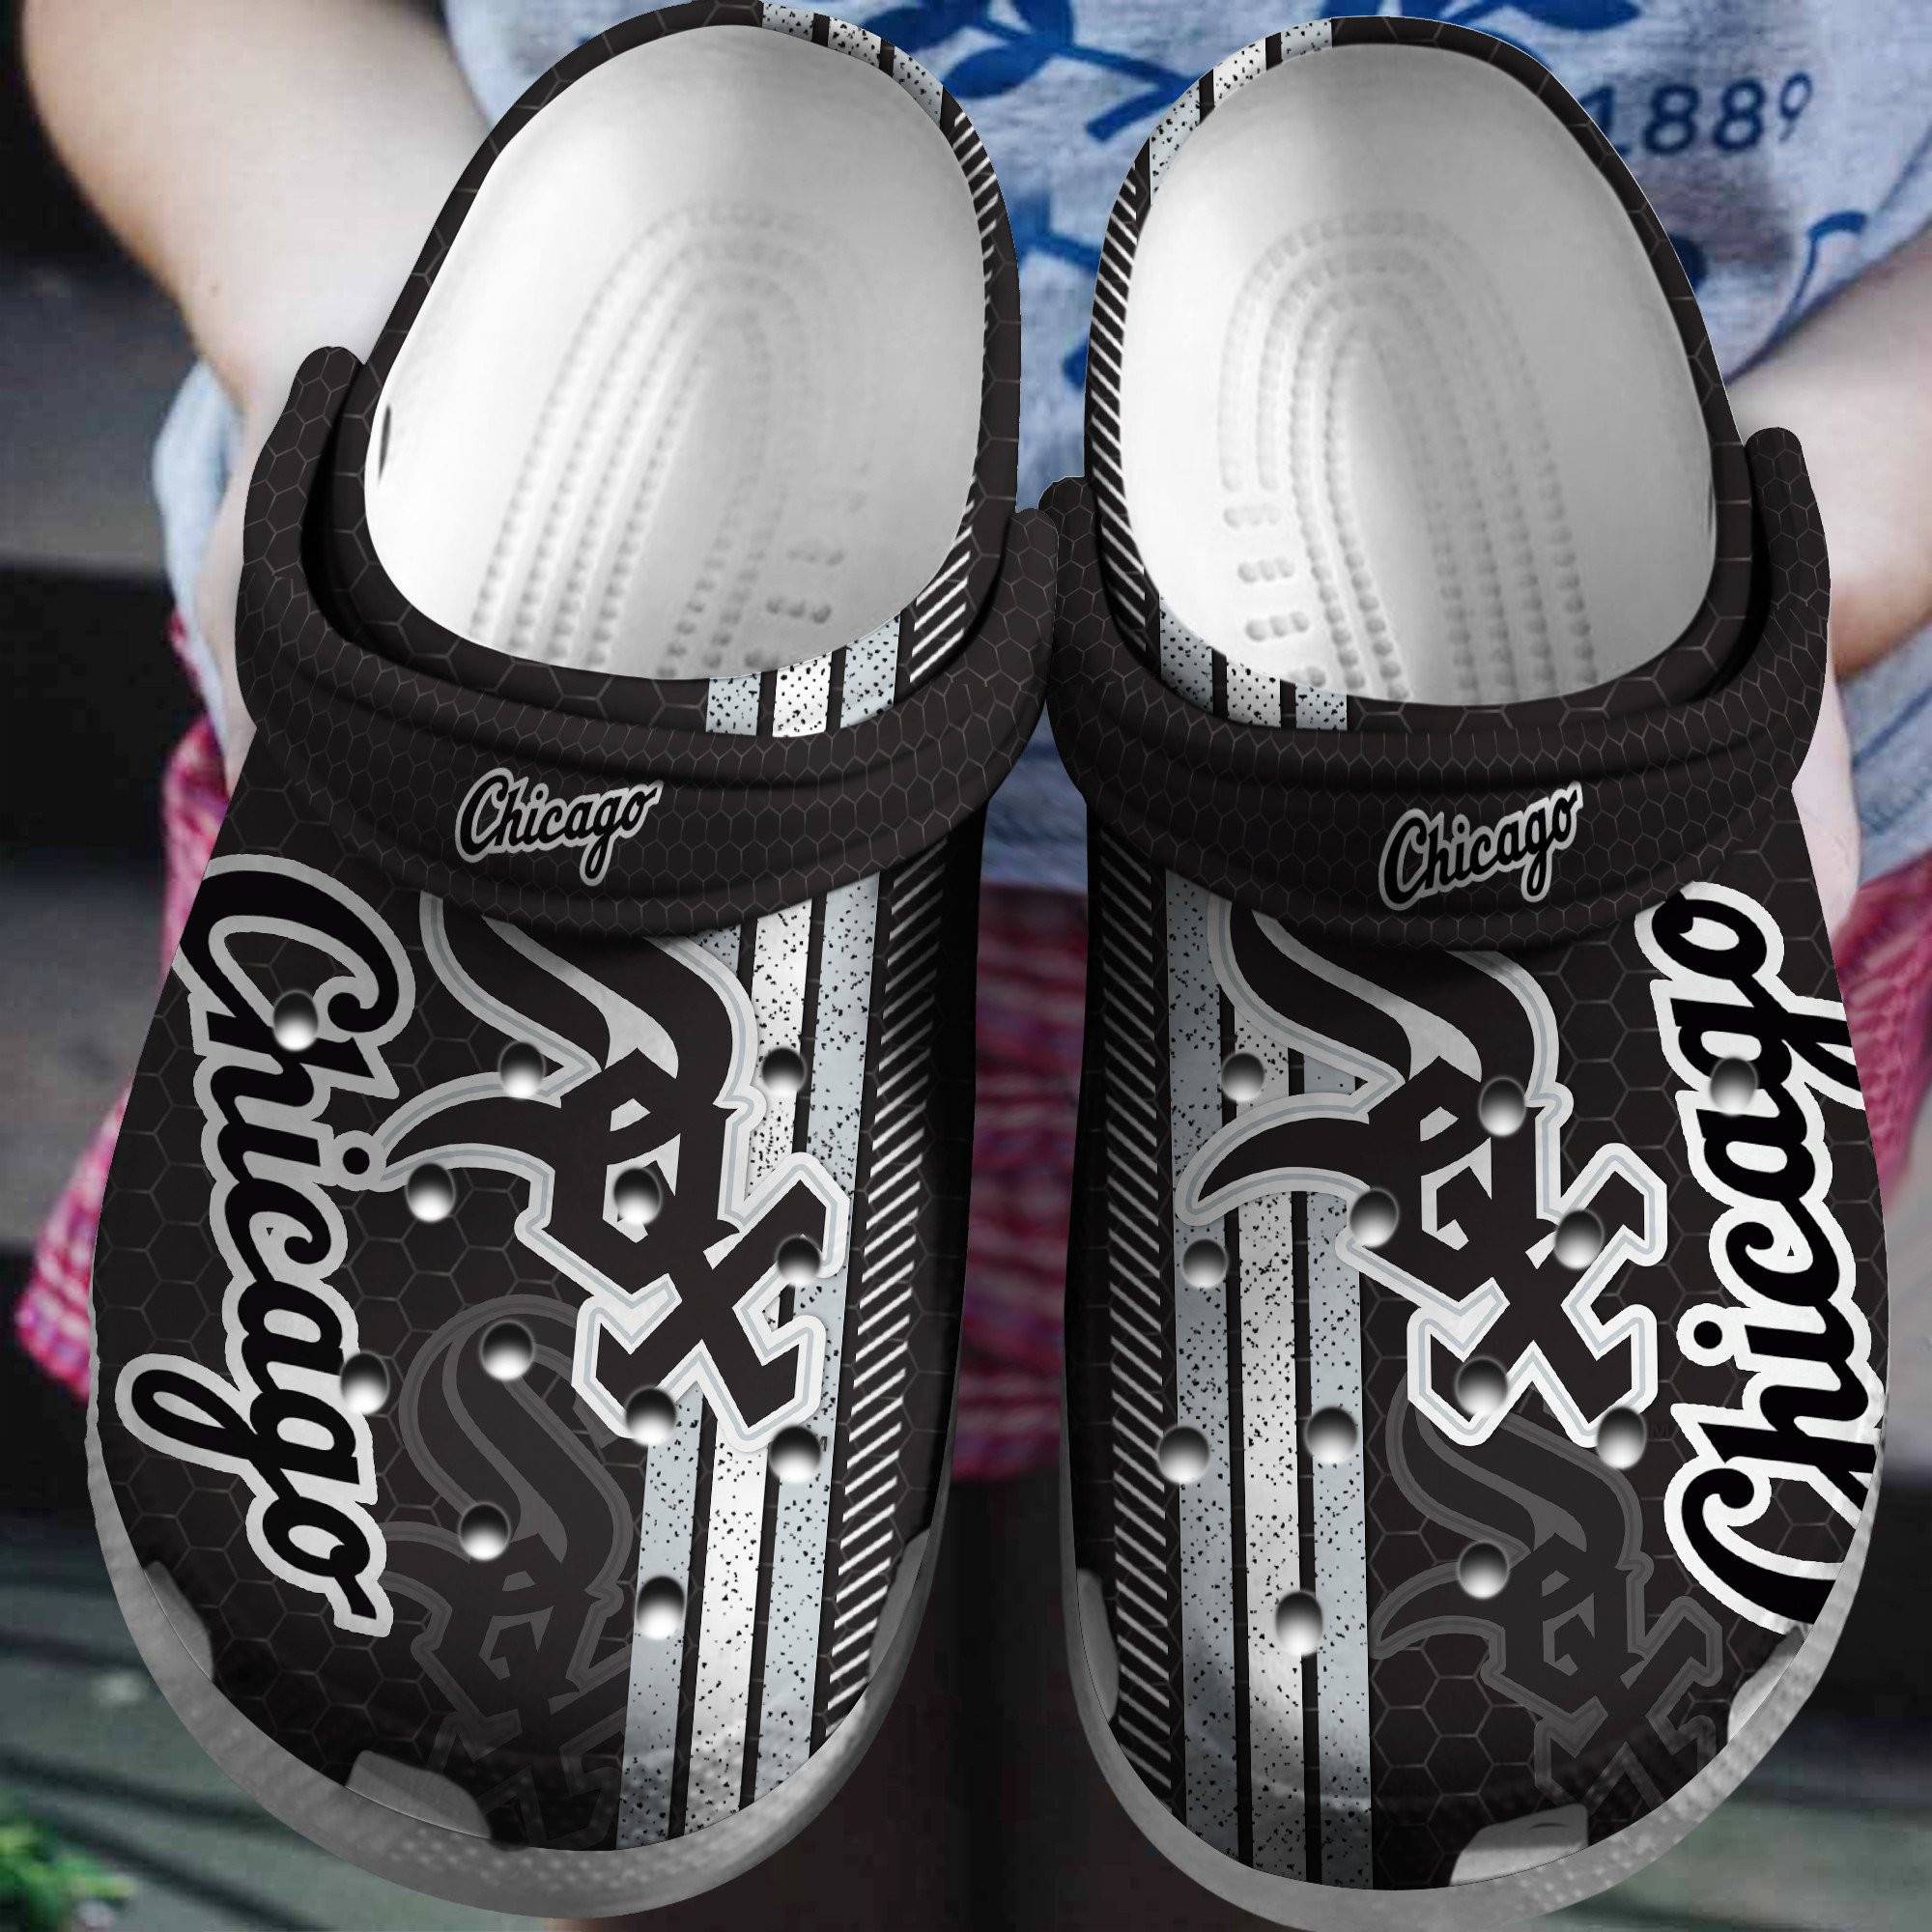 Hot Mlb Team Chicago White Sox Black – White Crocss Clog Shoesshoes Trusted Shopping Online In The World